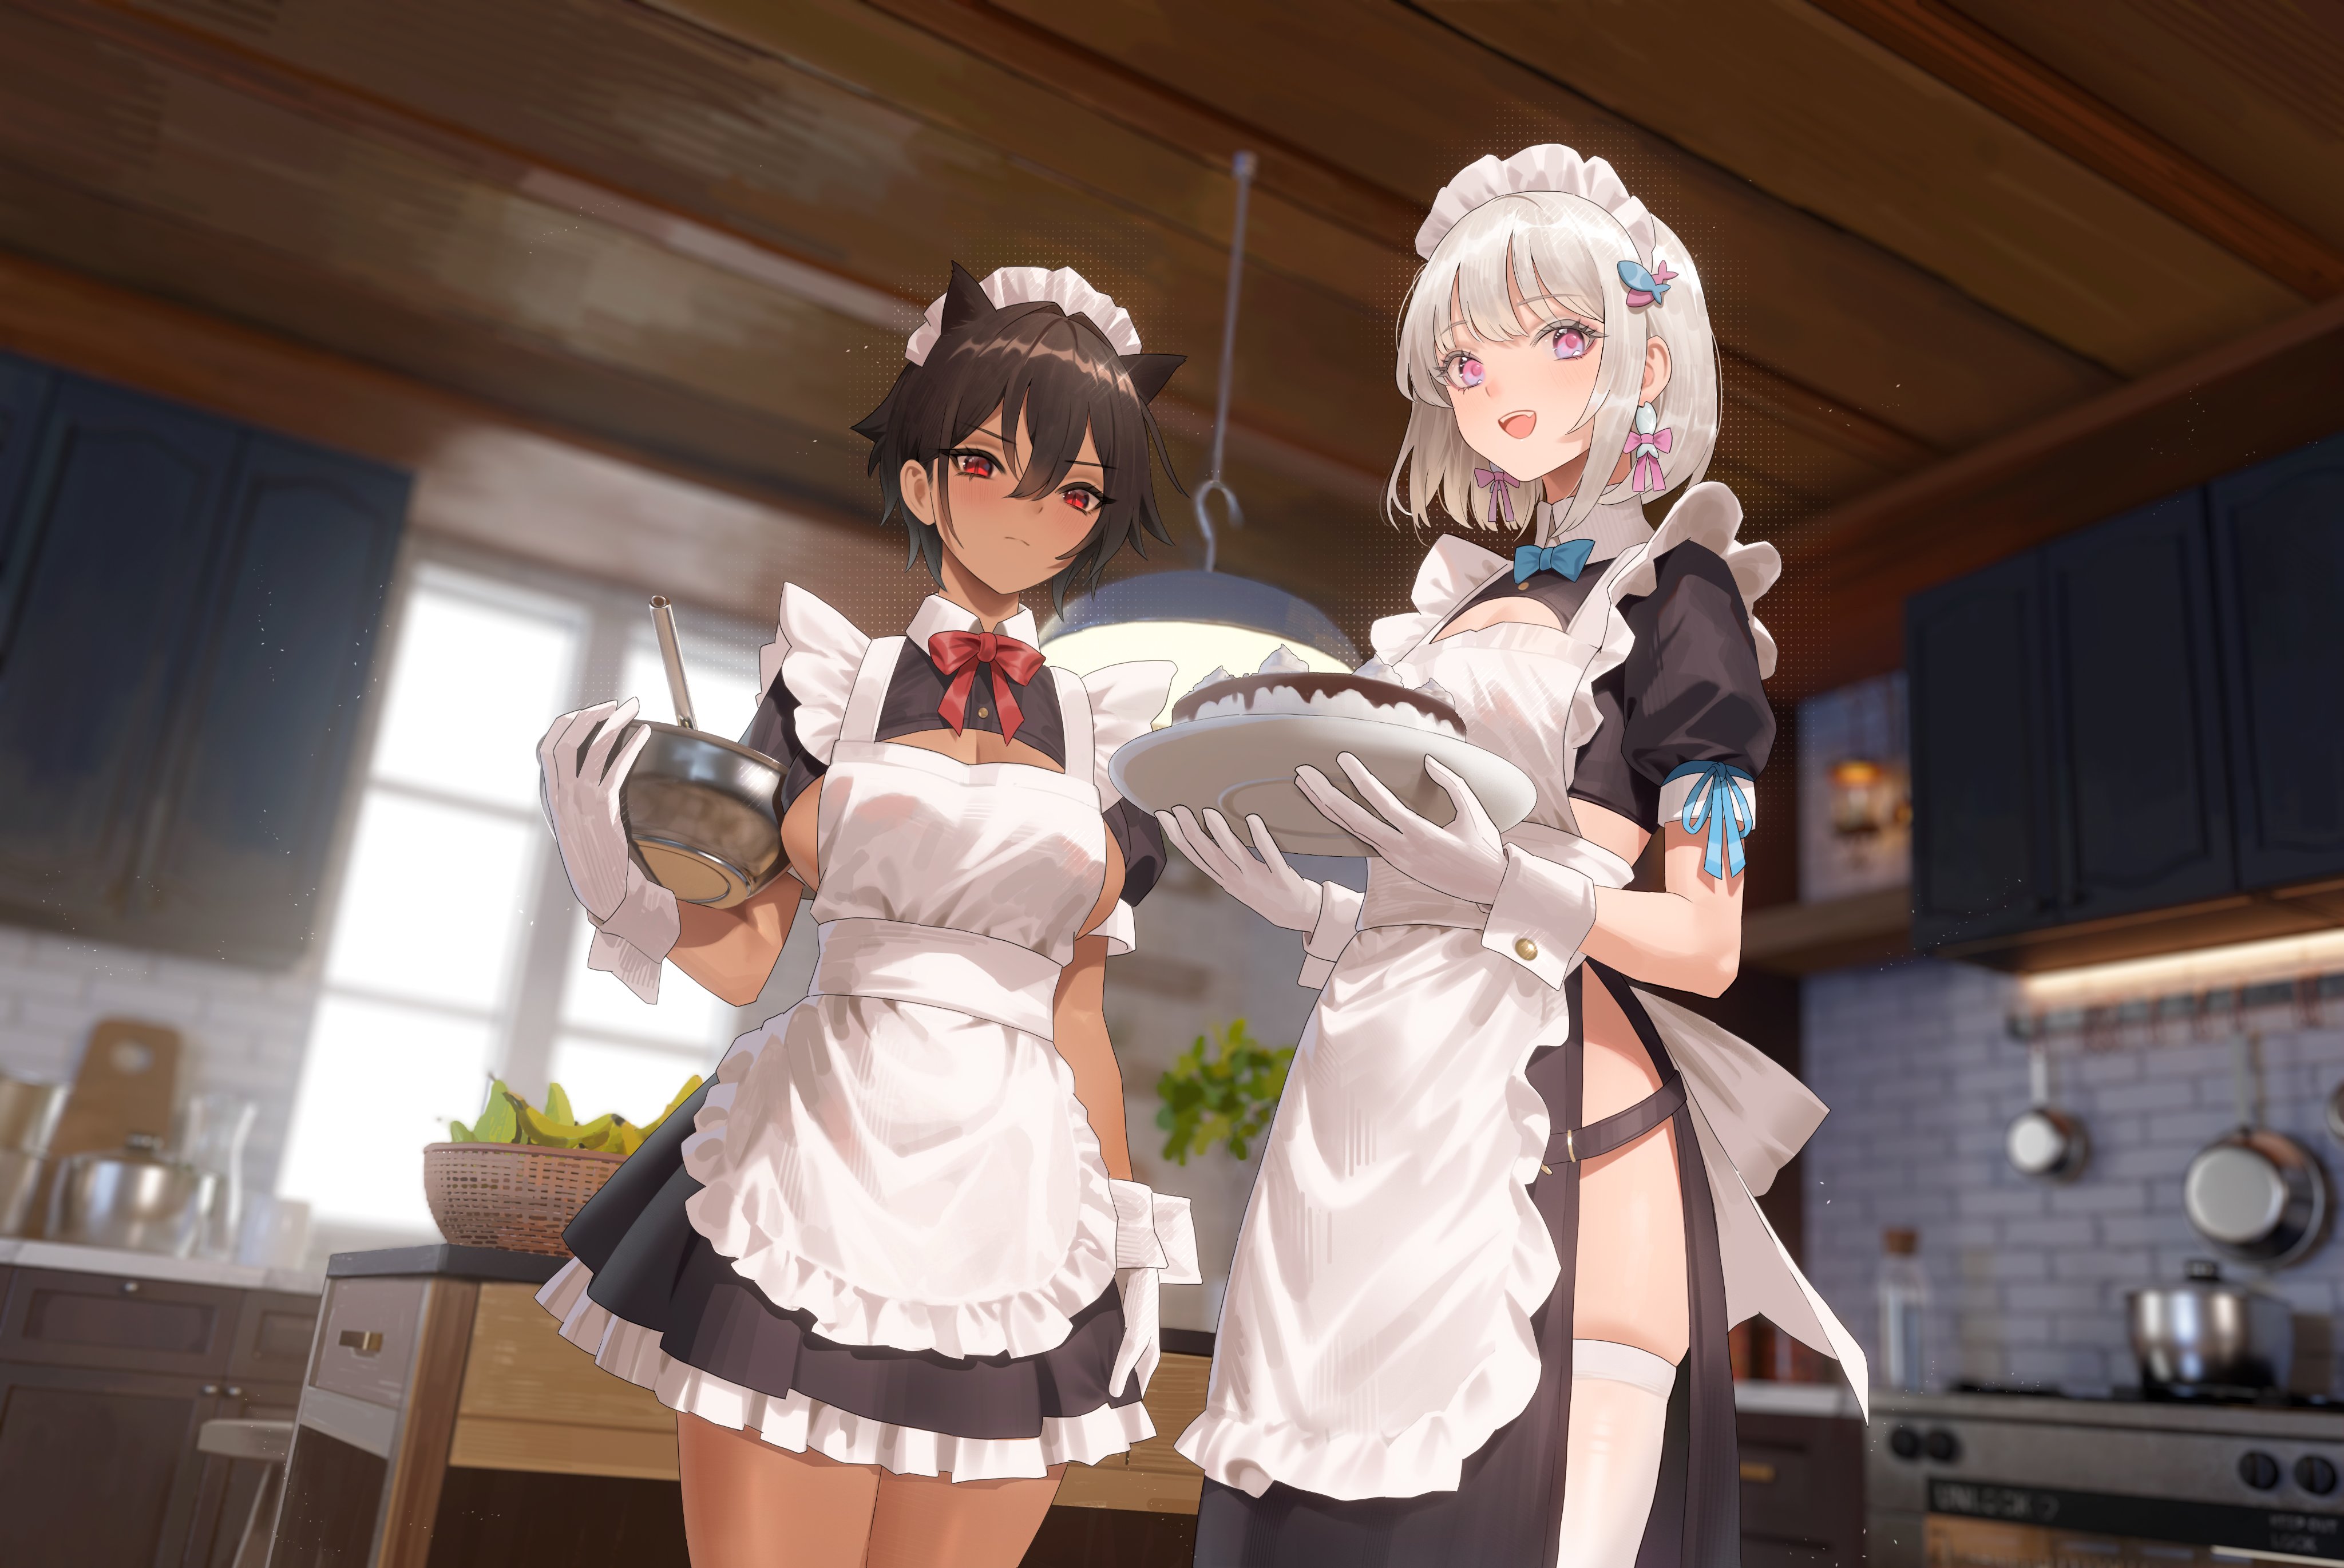 Maid Cat Girl Dark Skin White Hair Anime Girls Low Angle Maid Outfit Gloves Looking At Viewer Kitche 4096x2740